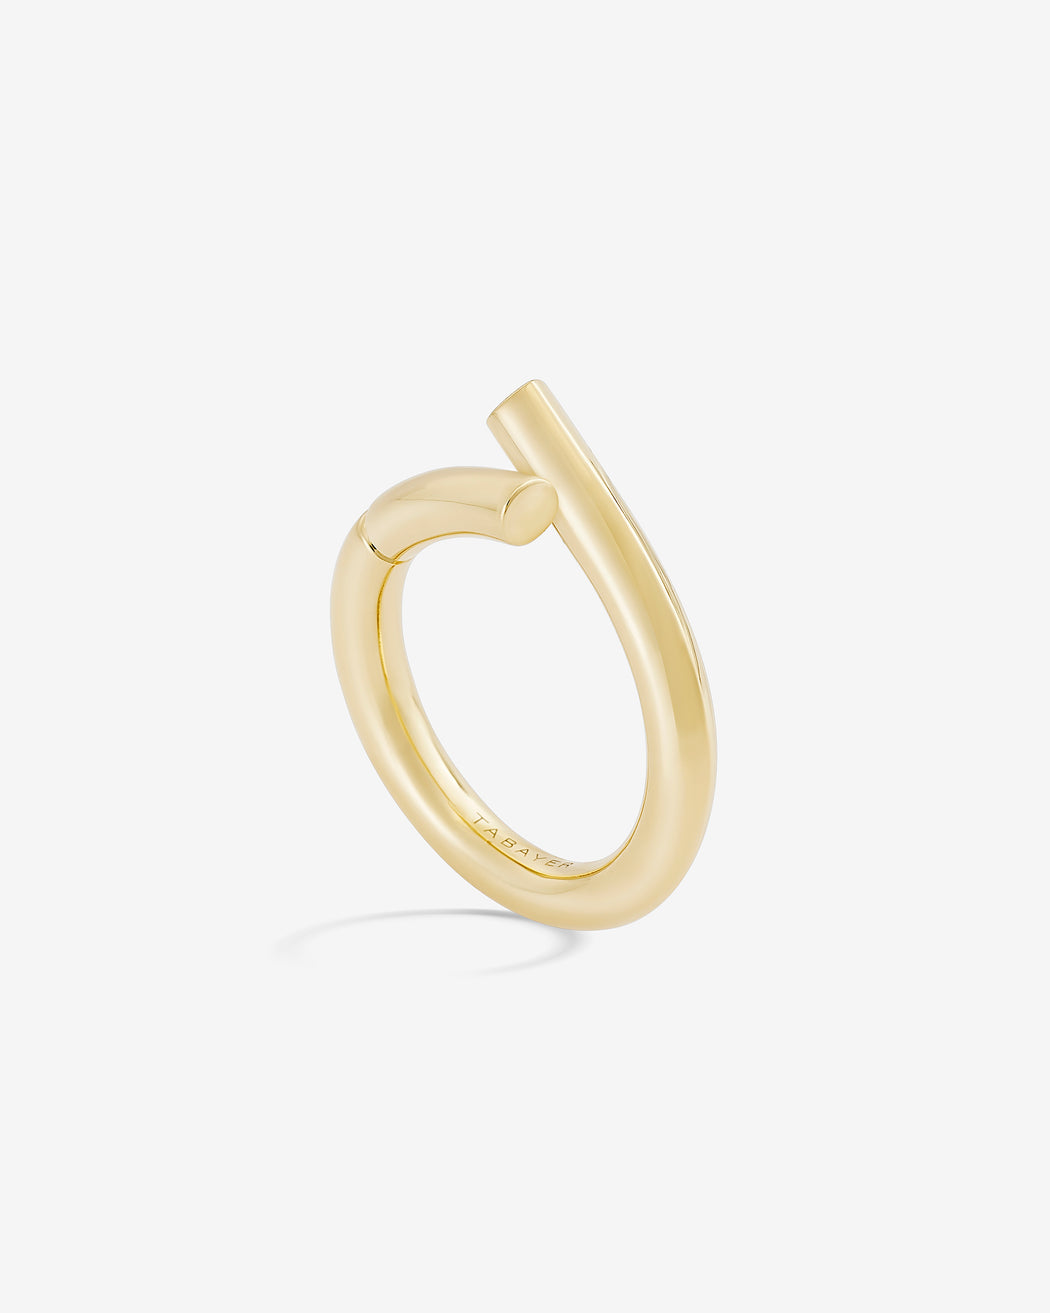 Oera ring 18k Fairmined yellow gold, Tabayer ethical fine jewelry